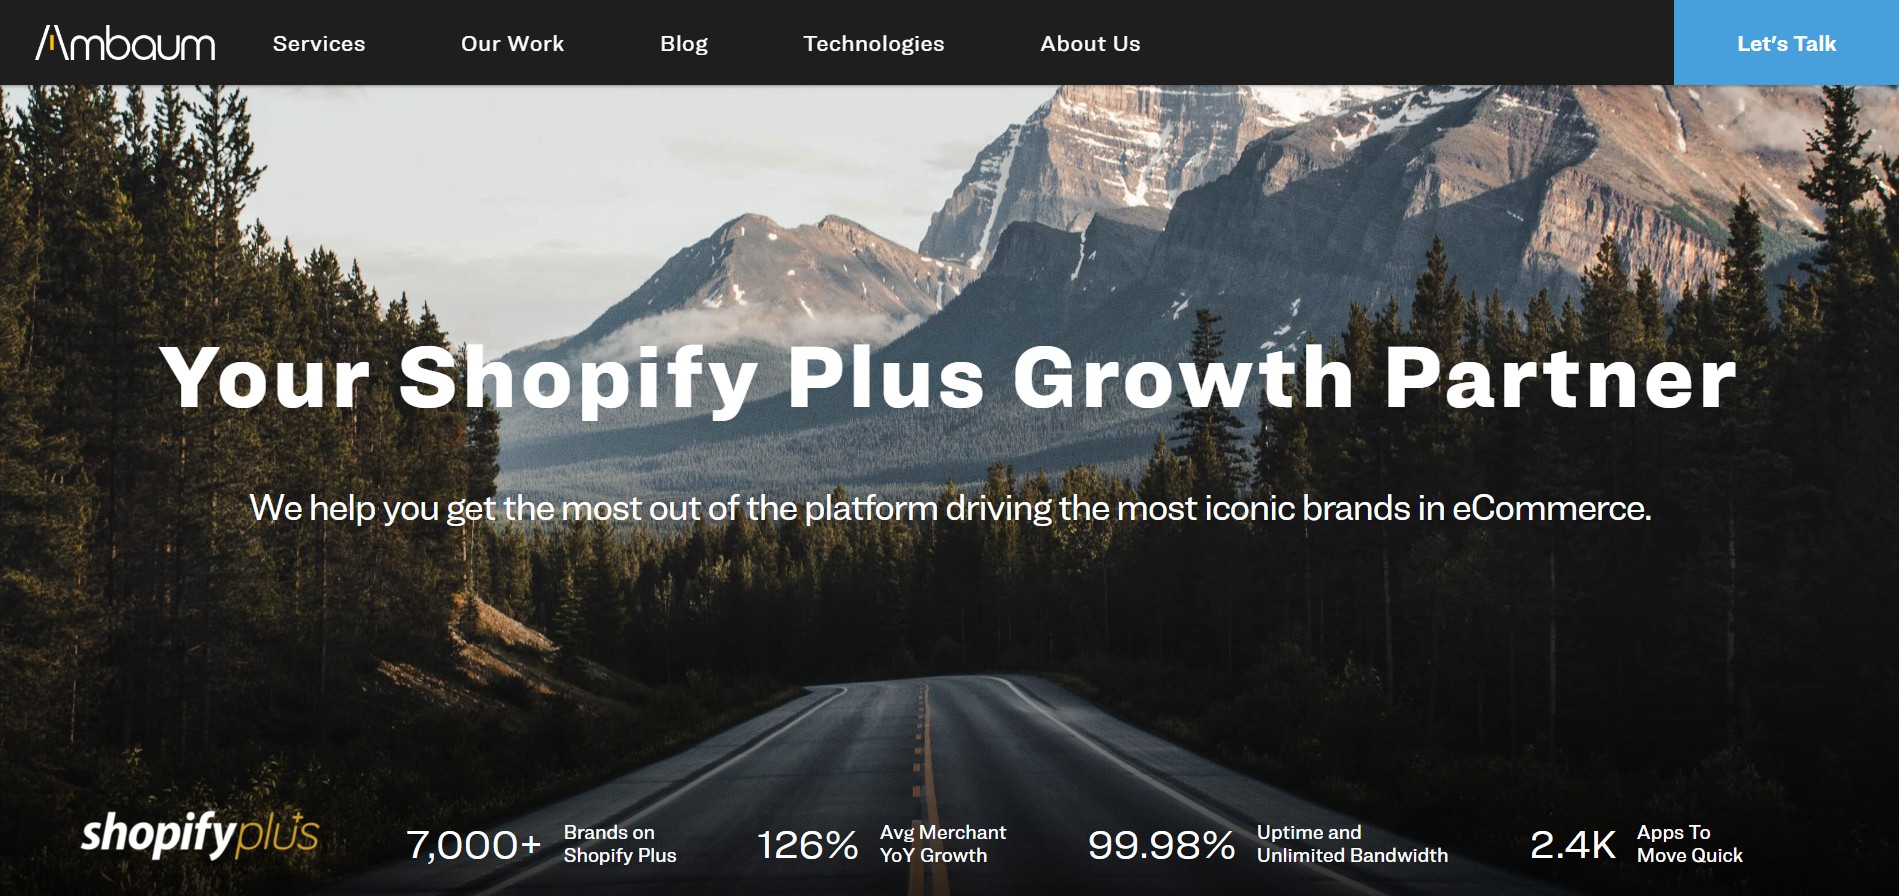 Ambaum is in top Shopify Design and Development Agency